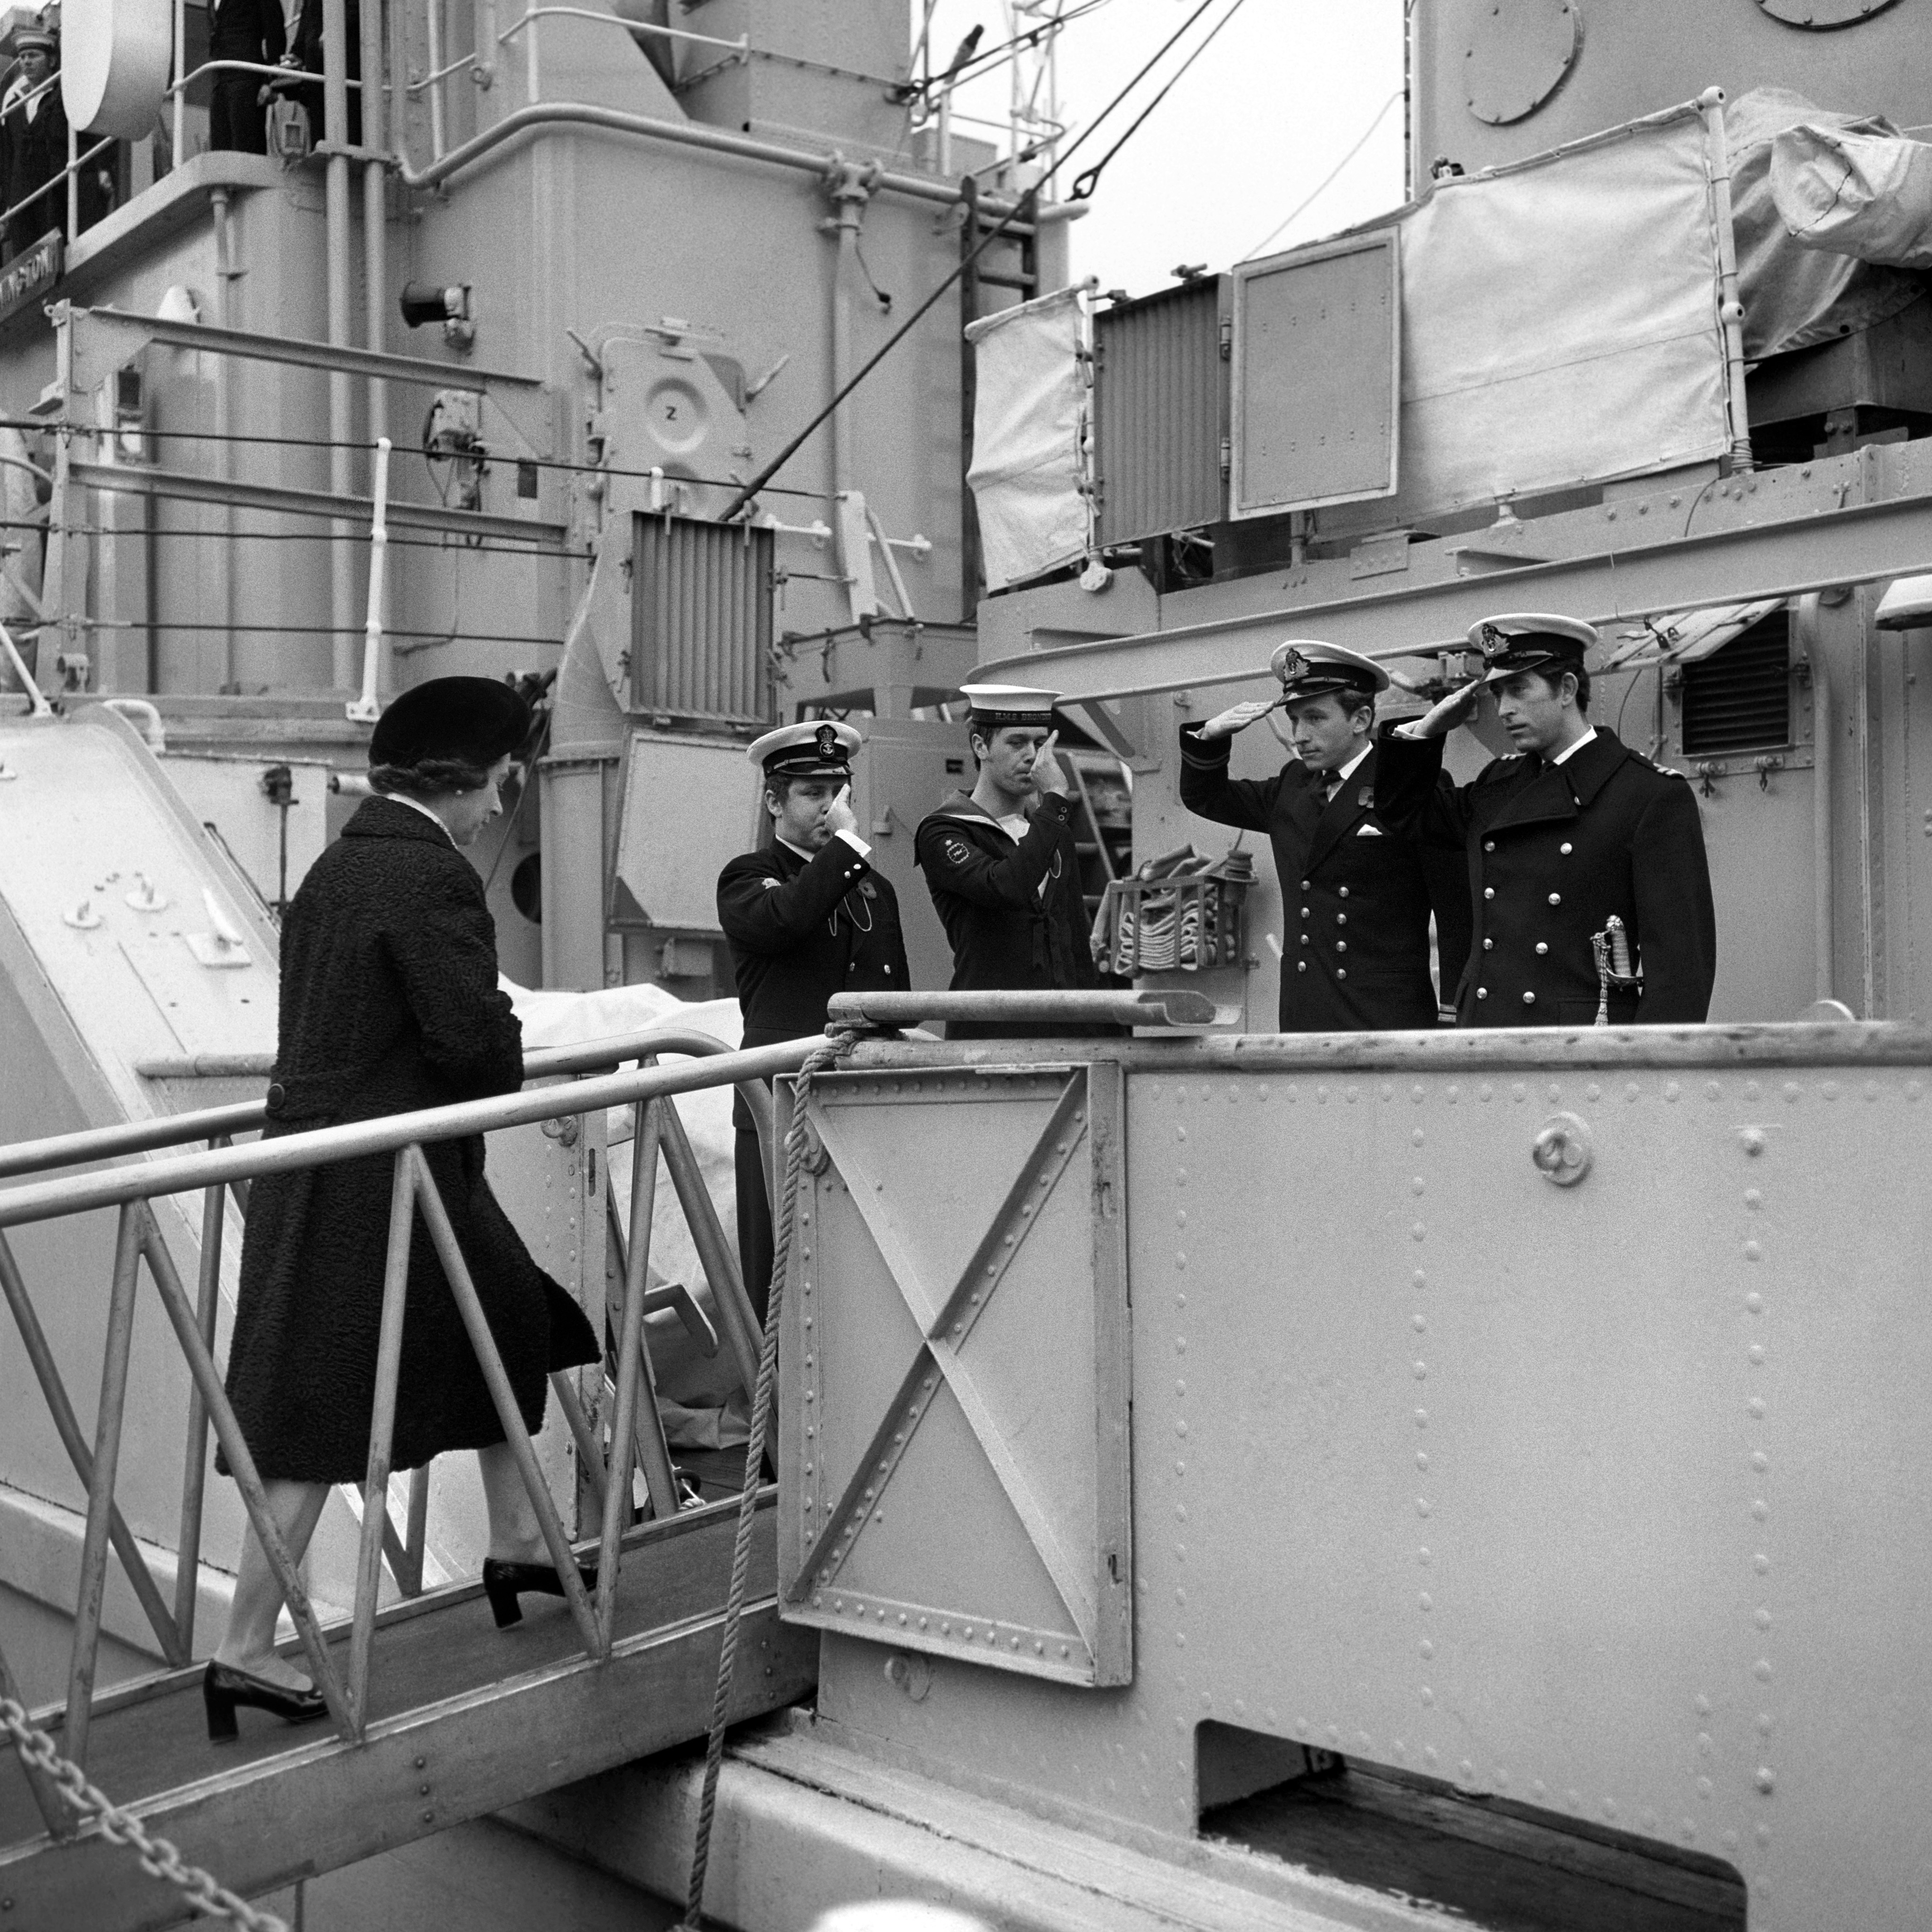 Queen Elizabeth II is piped aboard HMS Bronington to visit the ship's commander, The Prince of Wales.